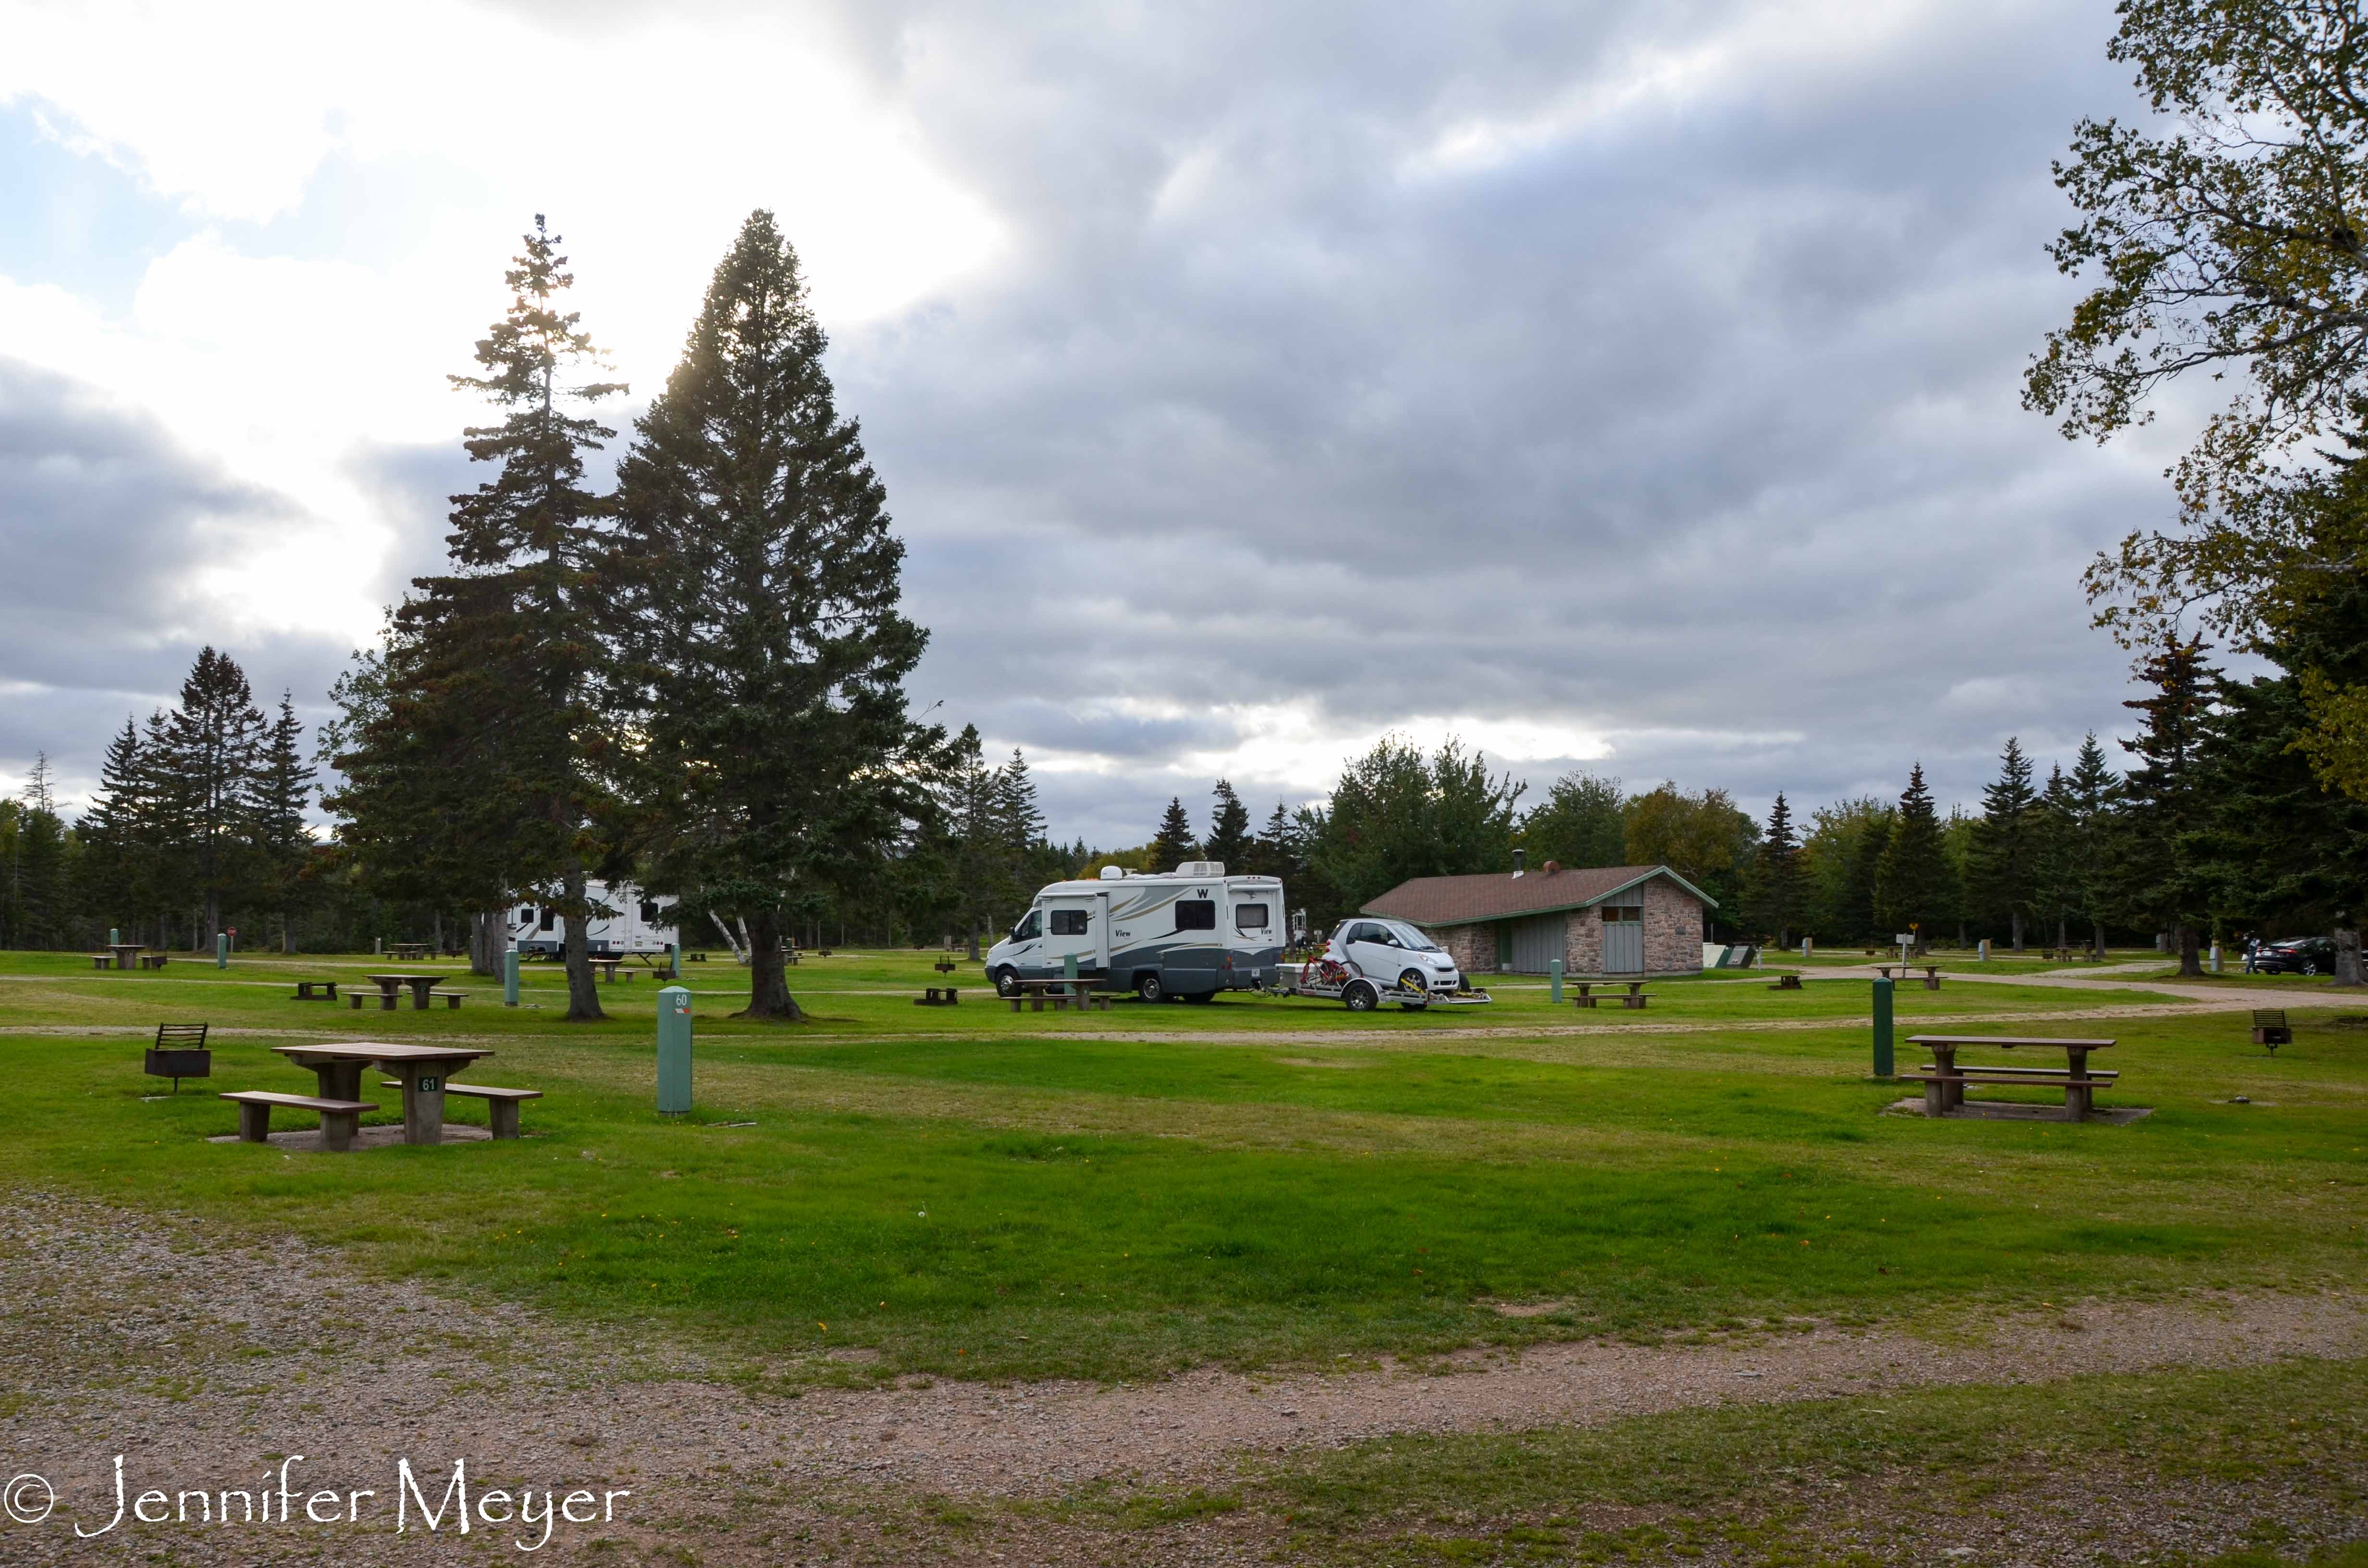 The campground was nearly empty.